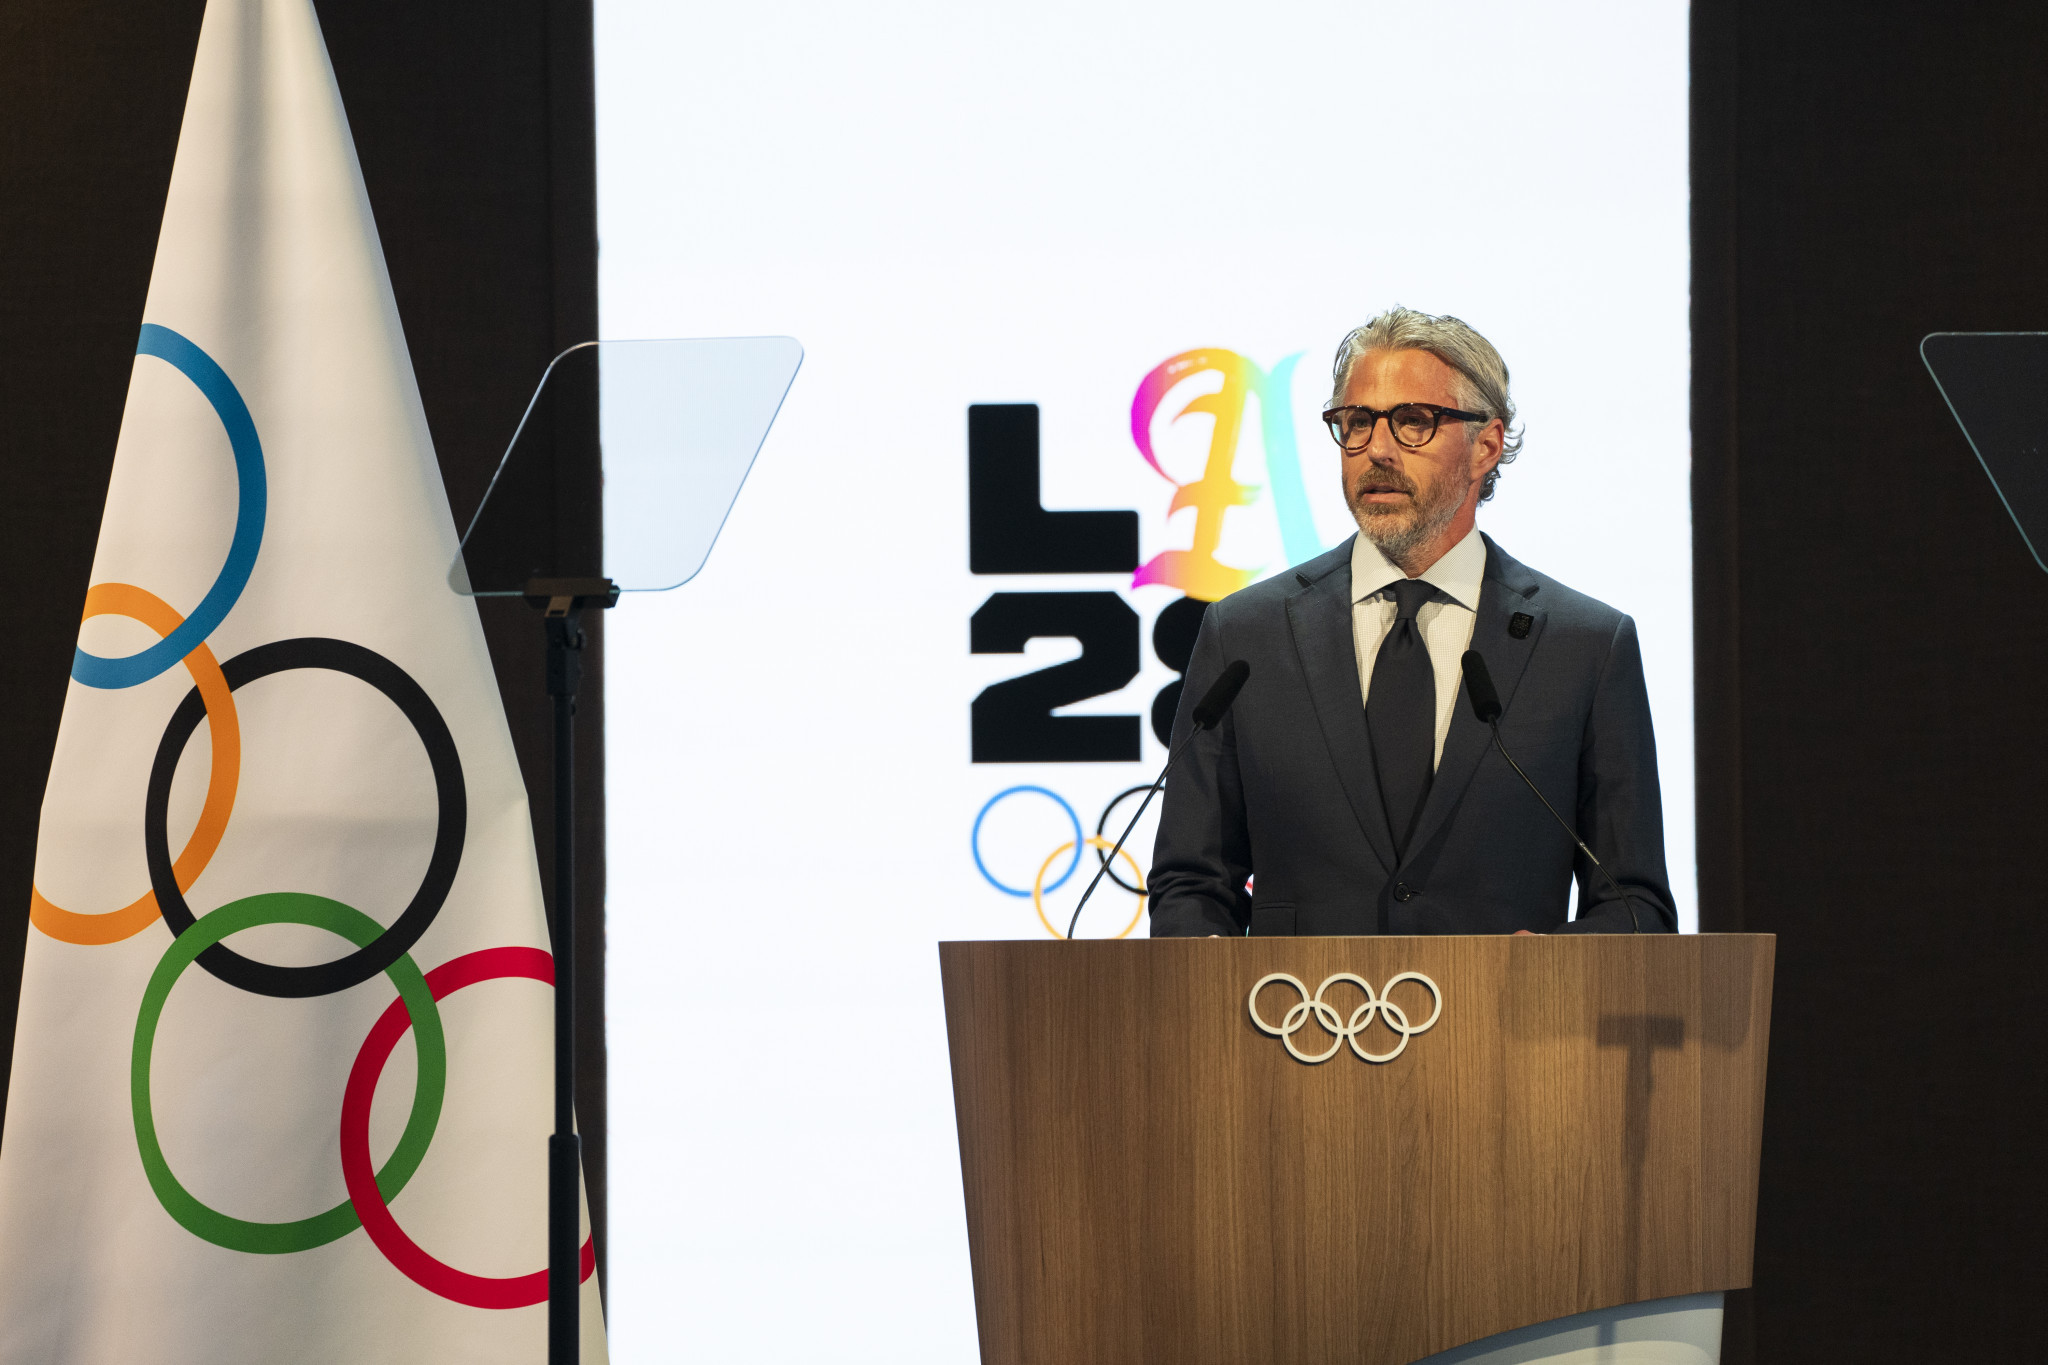 Los Angeles 2028 chairman Wasserman gives emotional speech about Ukraine and Israel at IOC Session